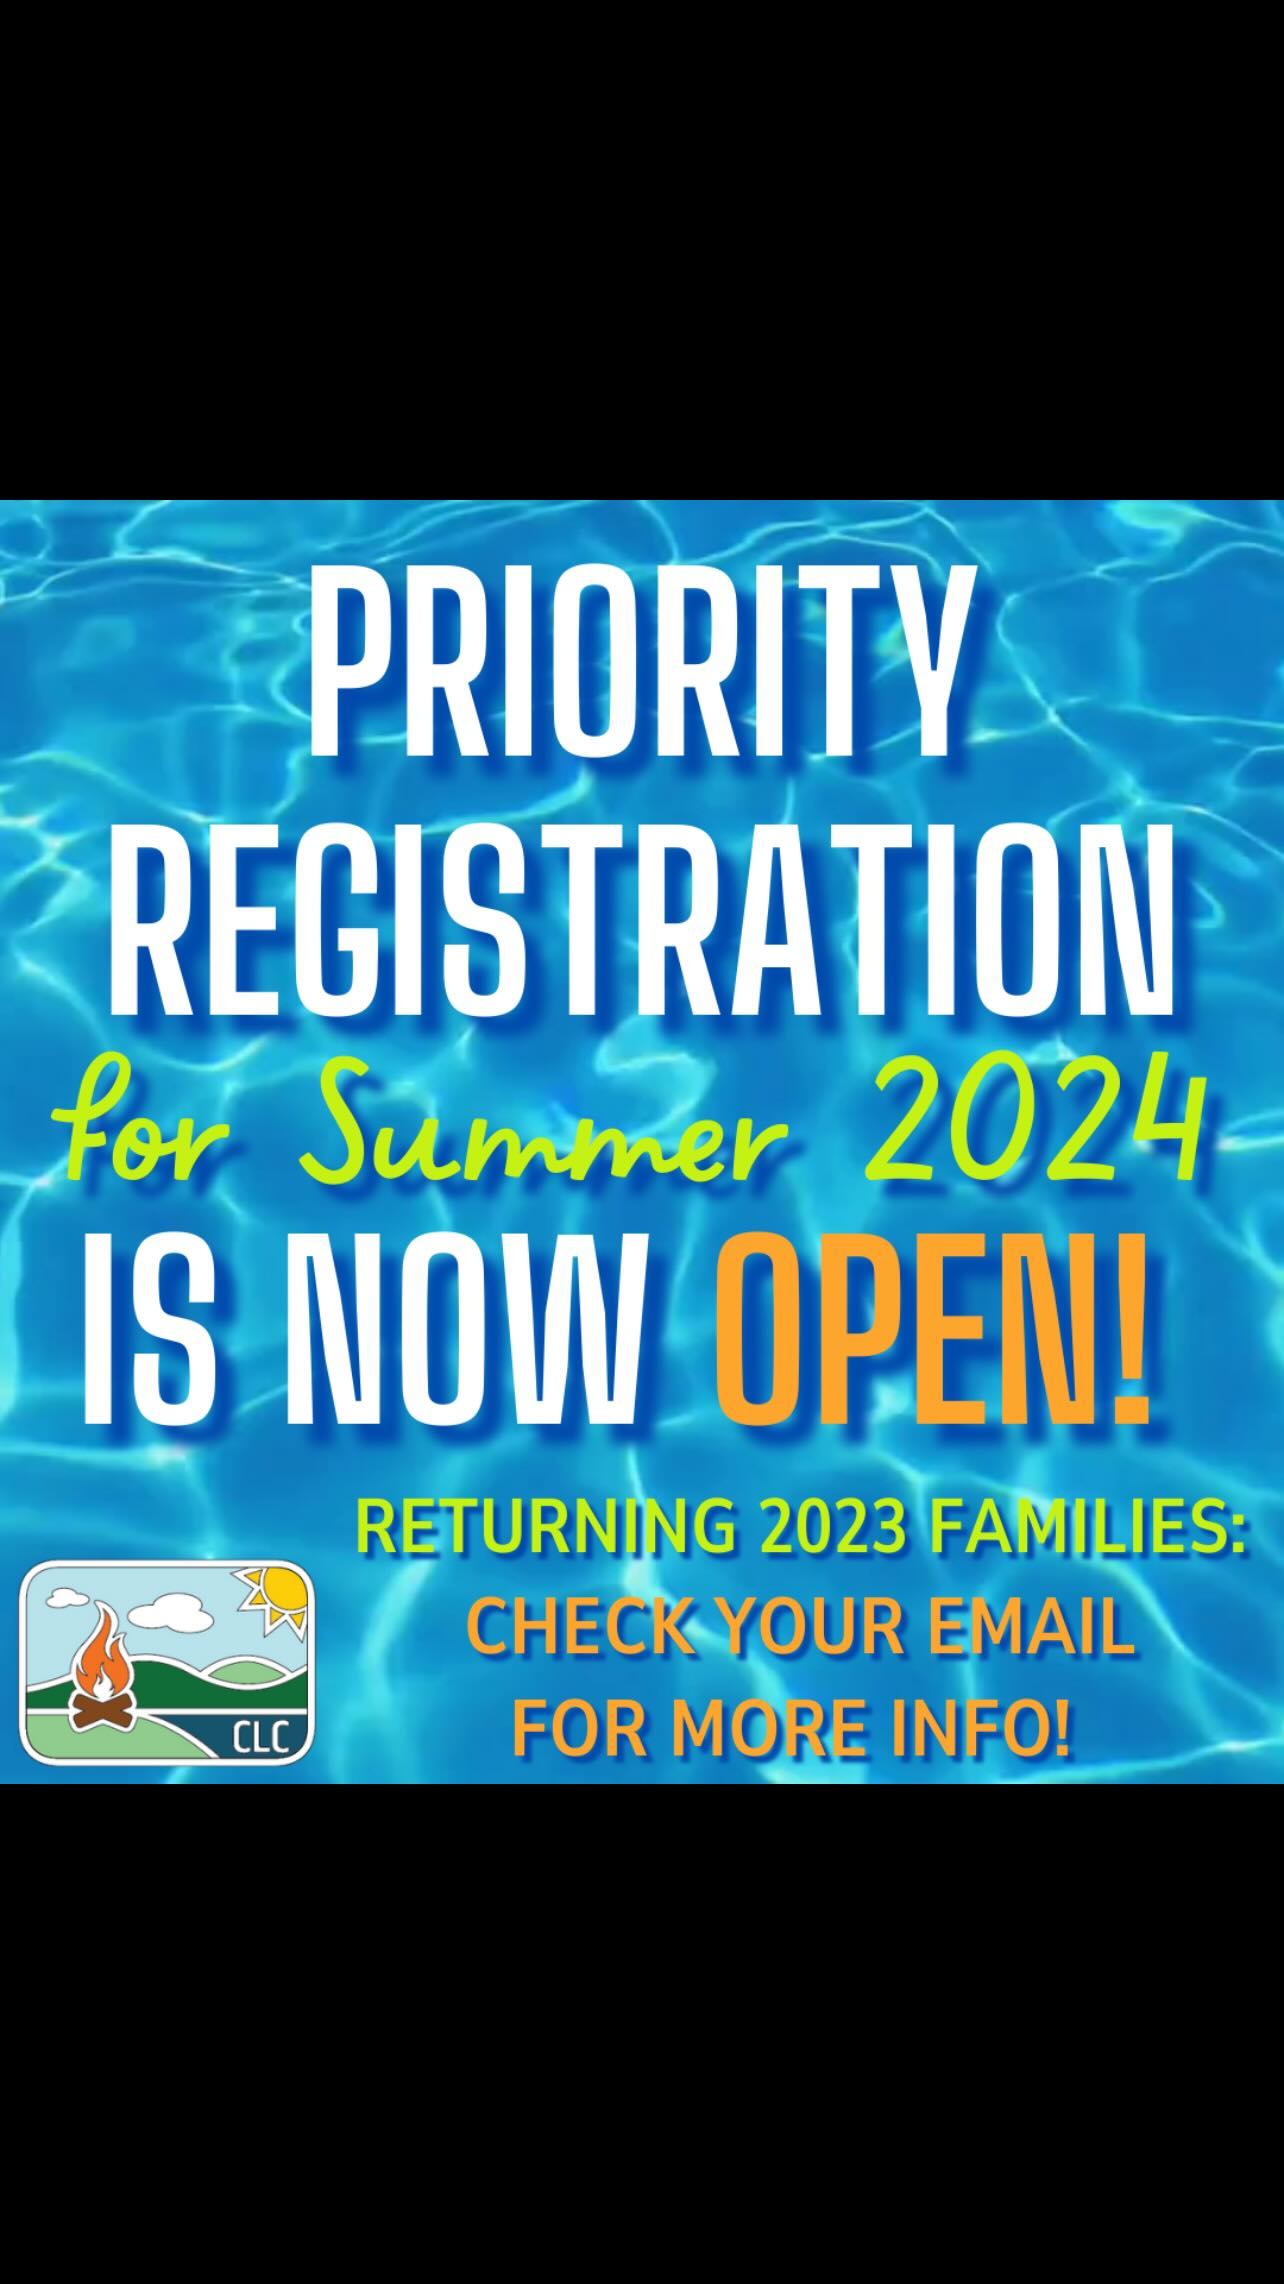 Water you waiting for?! Priority Registration for Summer 2024 is now open for Returning 2023 Families!